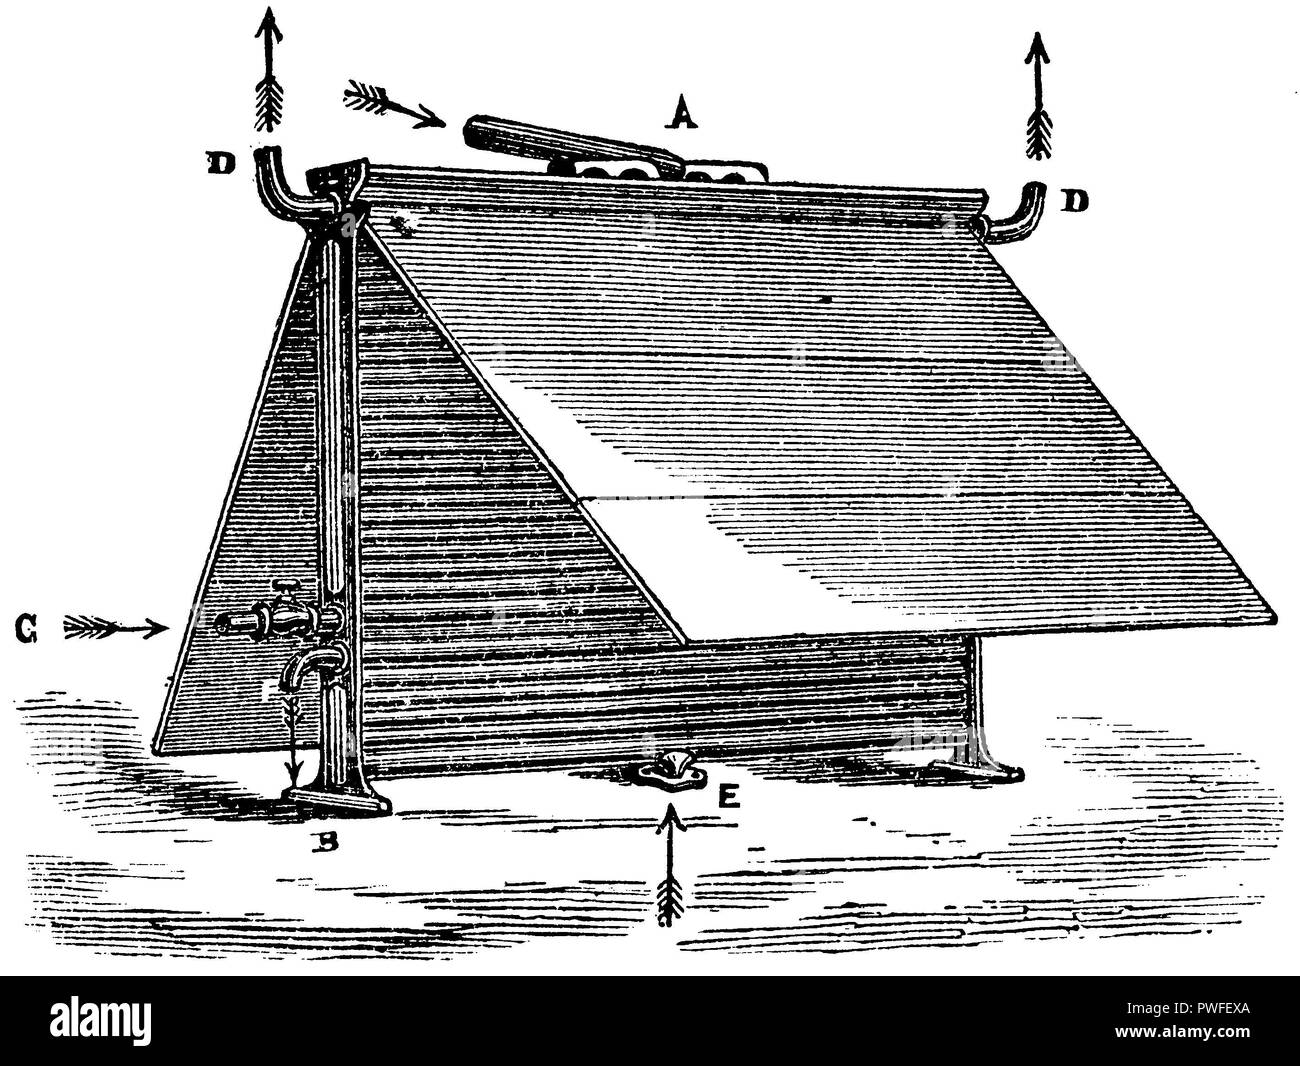 Lawrence's device for cooling bottom-fermented wort. A) entry into the wort, B) exit of the wort, C) entrance of the river water or well water, D) exit of the river water or the well water, E) entrance of the ice water, F) exit of the ice water, Stock Photo